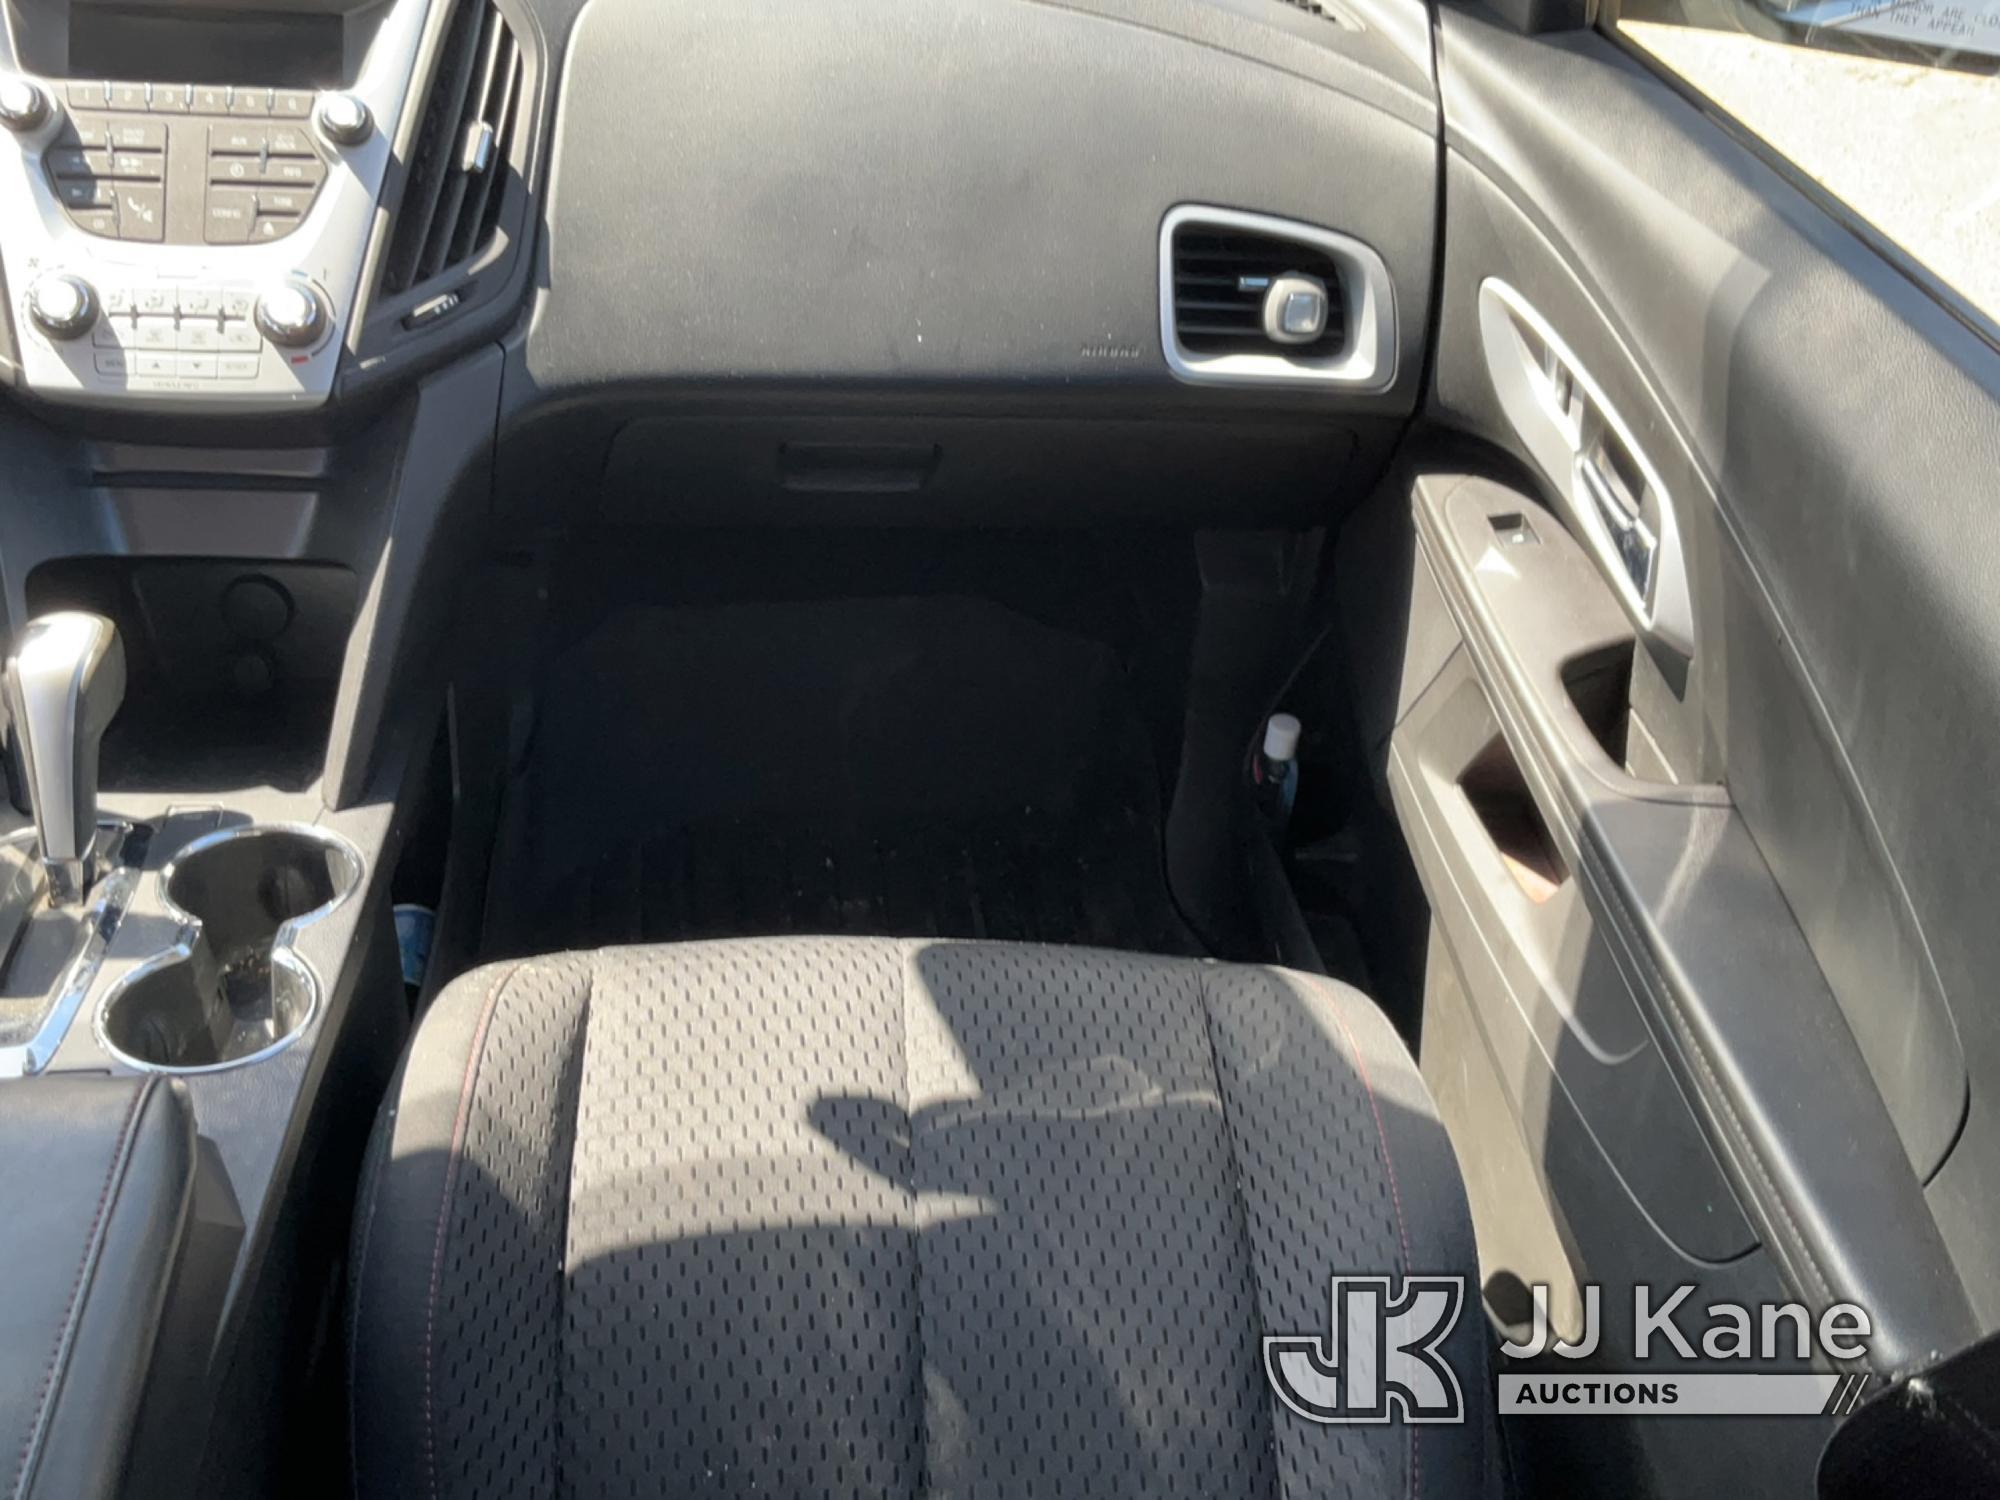 (South Beloit, IL) 2015 Chevrolet Equinox 4-Door Sport Utility Vehicle Not Running, Condition Unknow